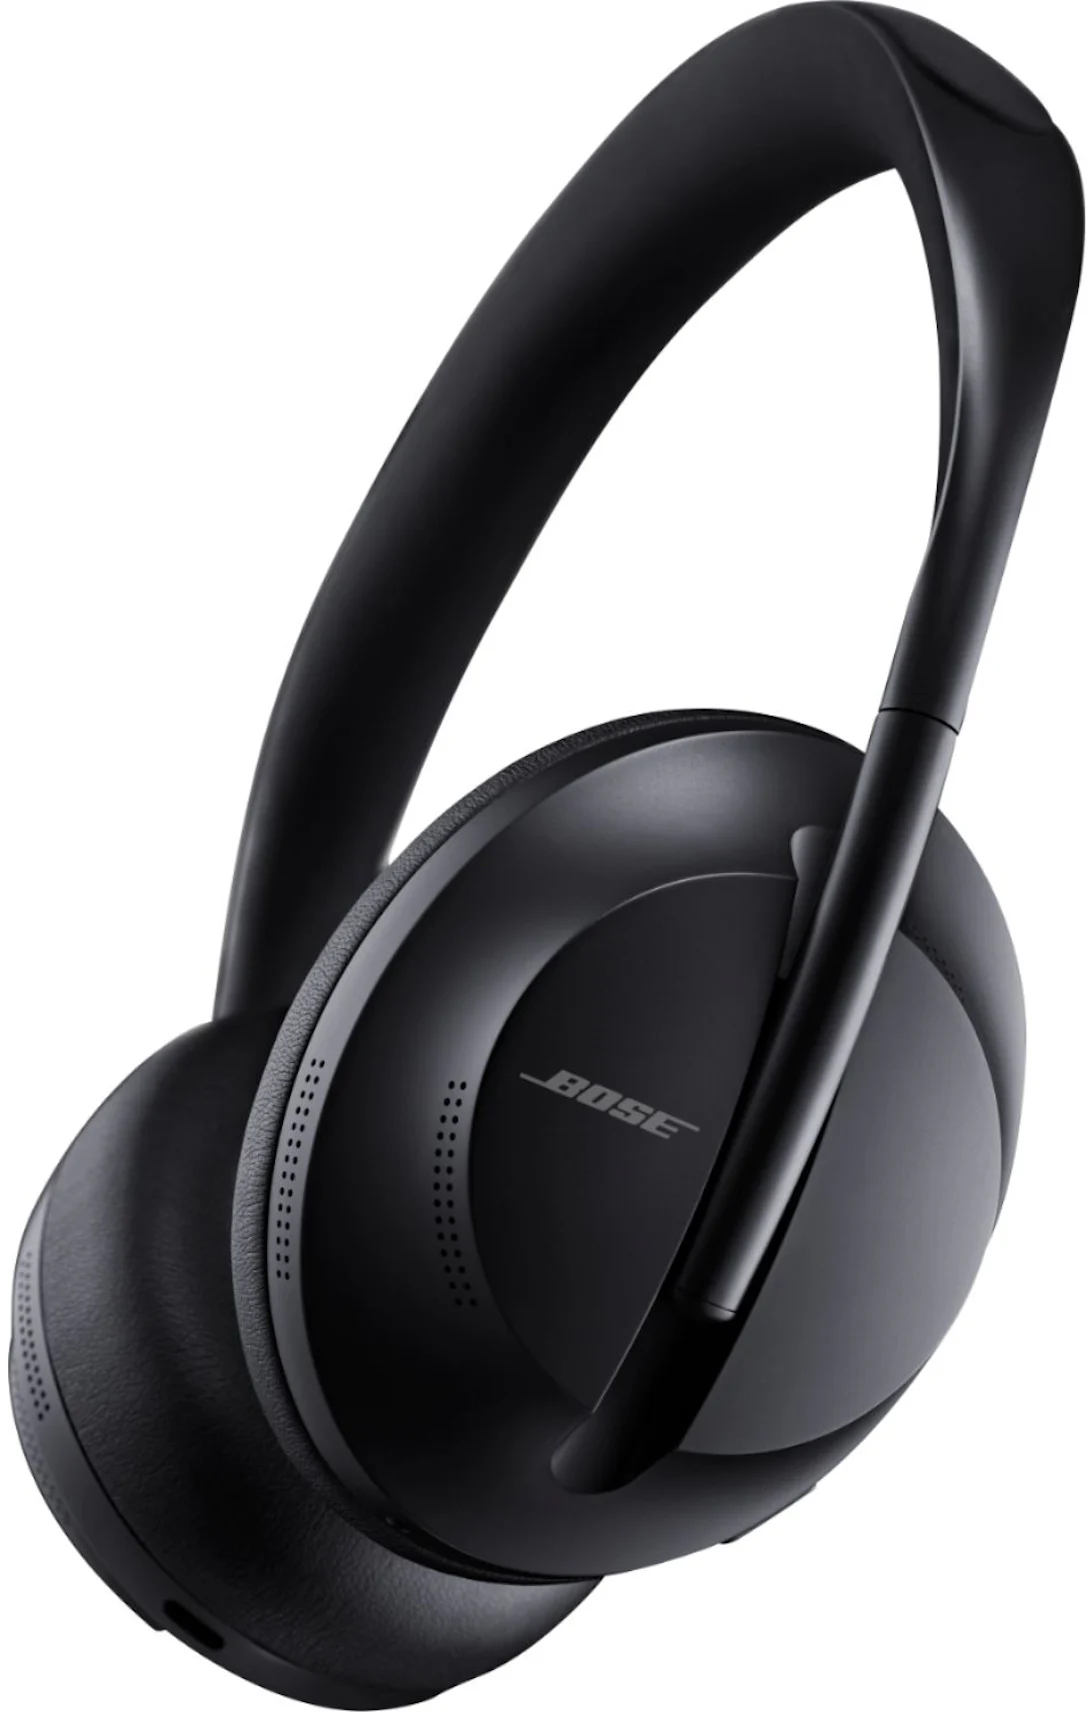 Hurry! Bose 700 noise cancelling headphones just dropped to $249